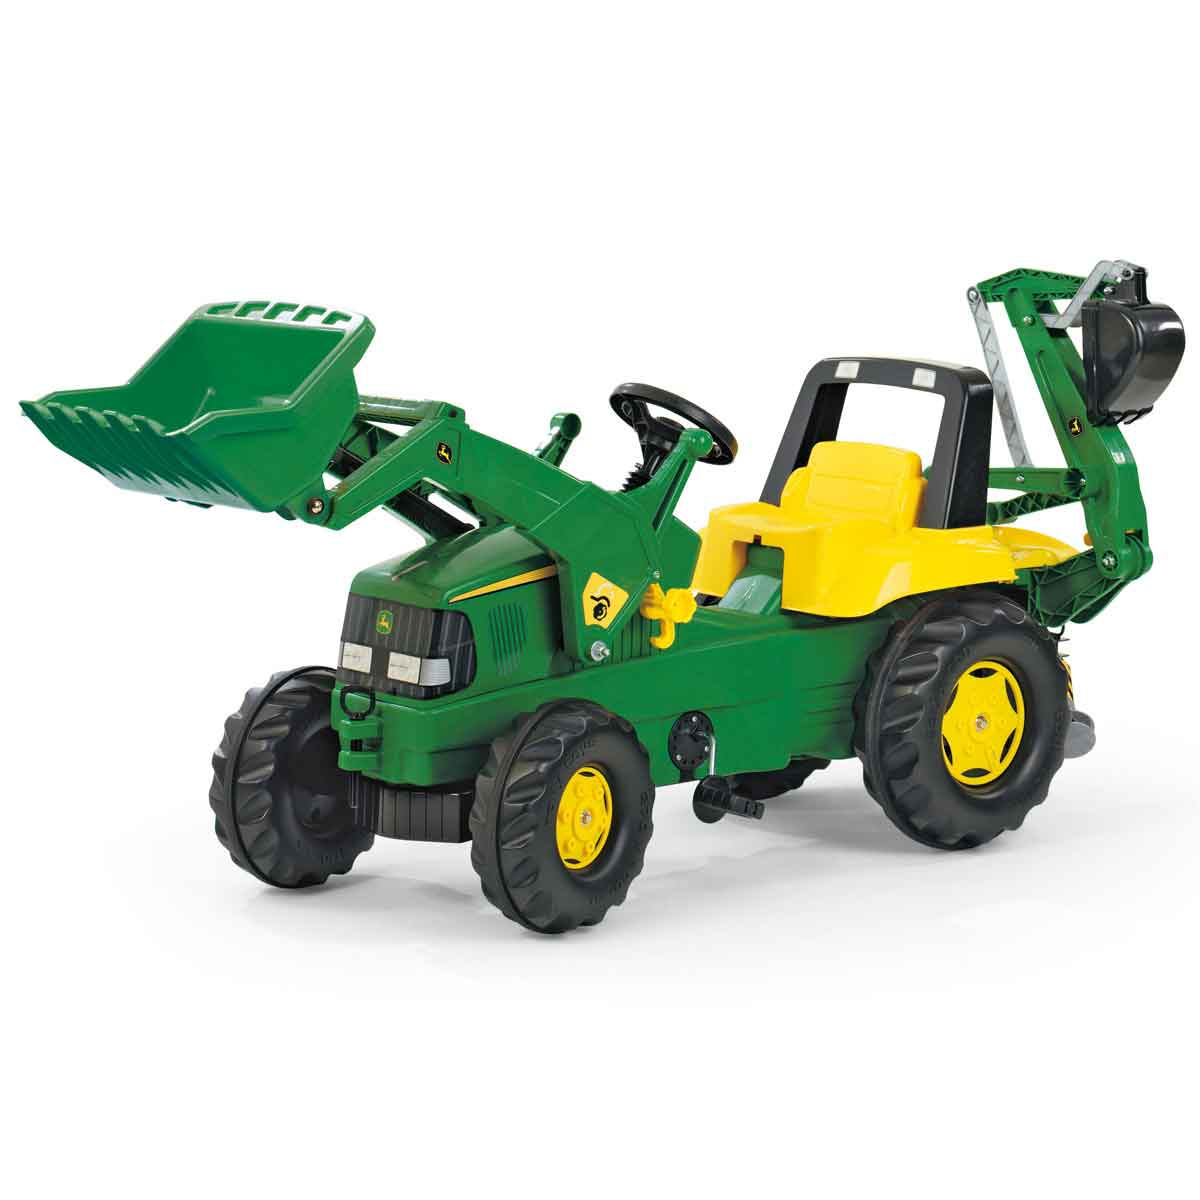 Rolly Toys Ride On John Deere Tractor with Frontloader and Rear Excavator, Green